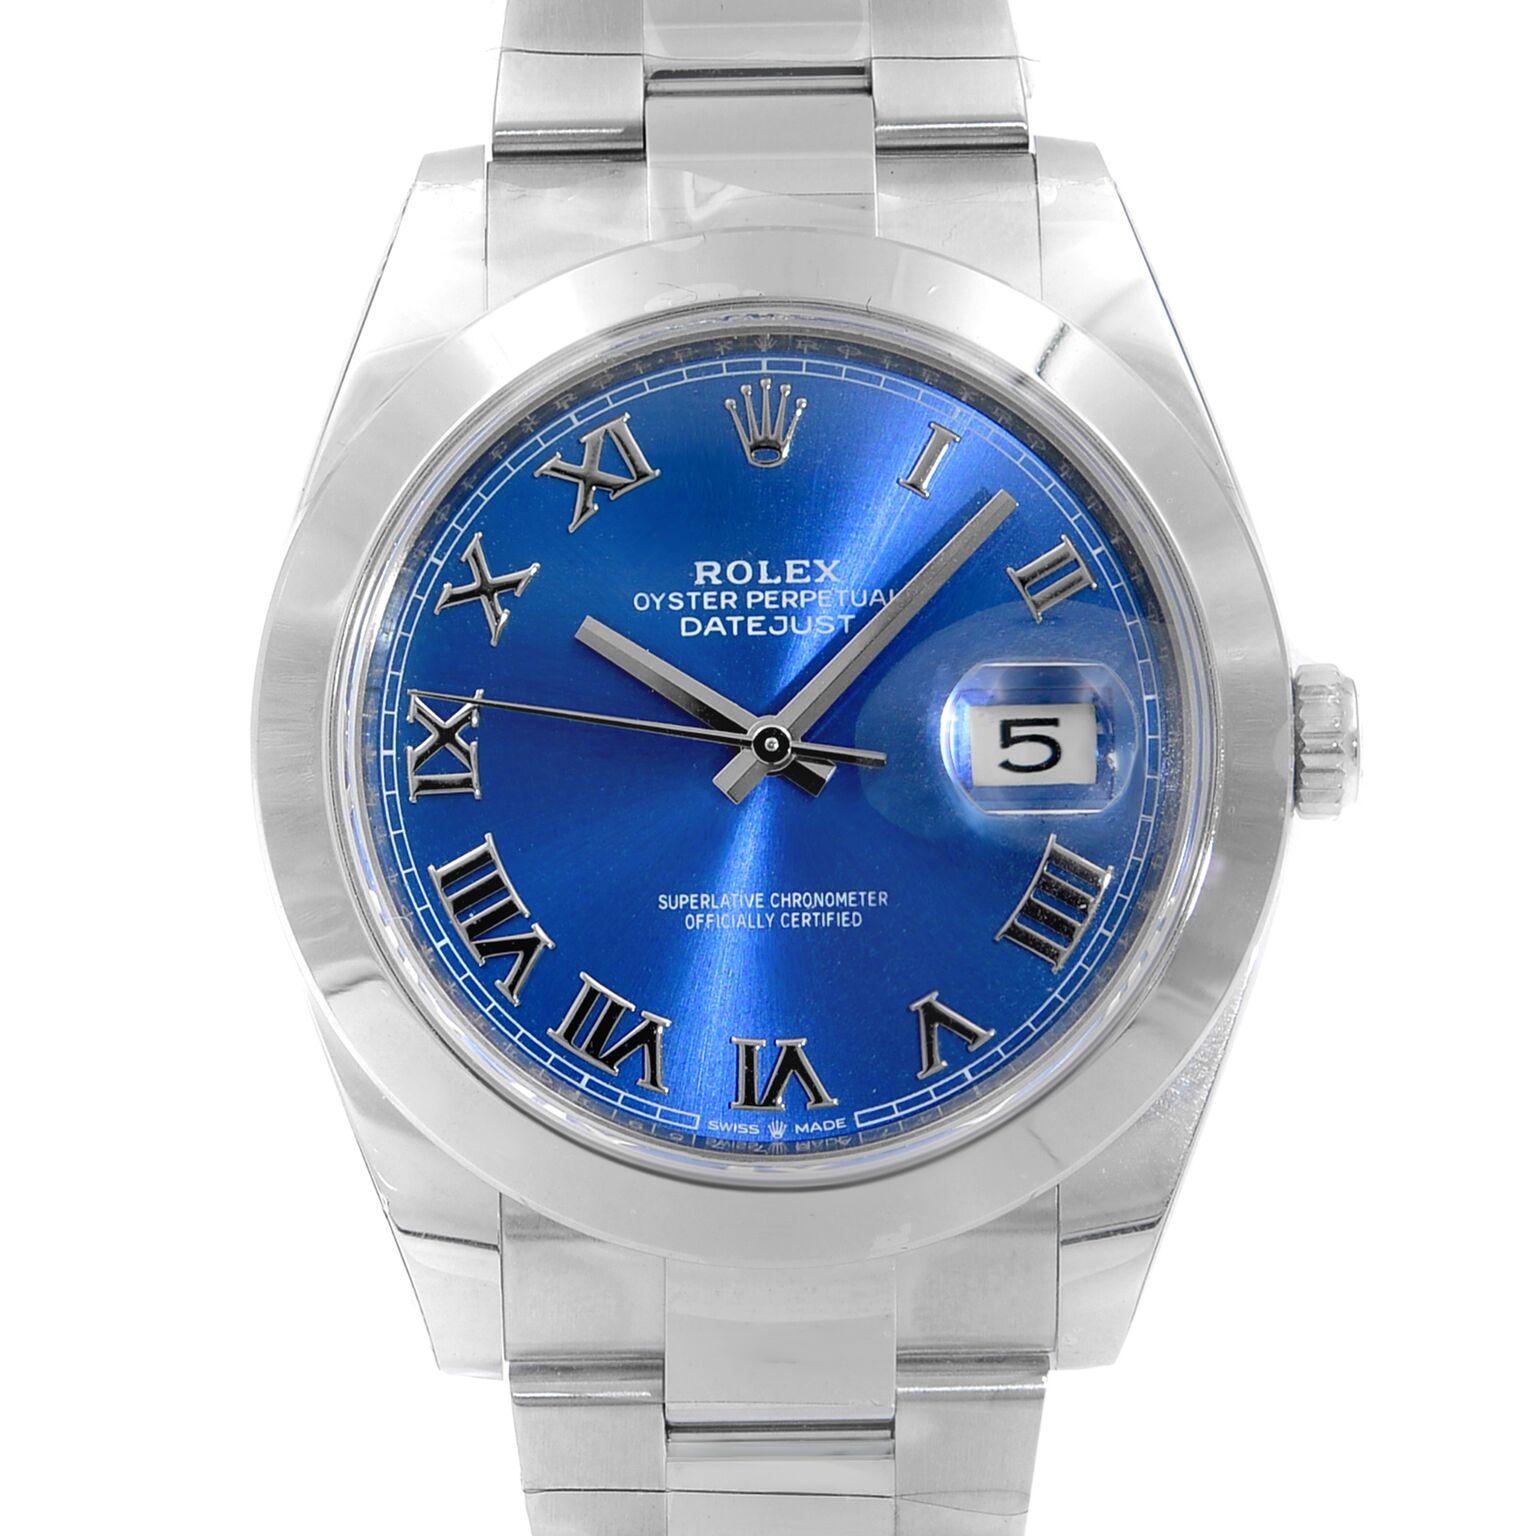 This brand new Rolex Datejust 41 126300 is a beautiful men's timepiece that is powered by a mechanical (automatic) movement which is cased in a stainless steel case. It has a round shape face, date indicator dial, and has hand roman numerals style